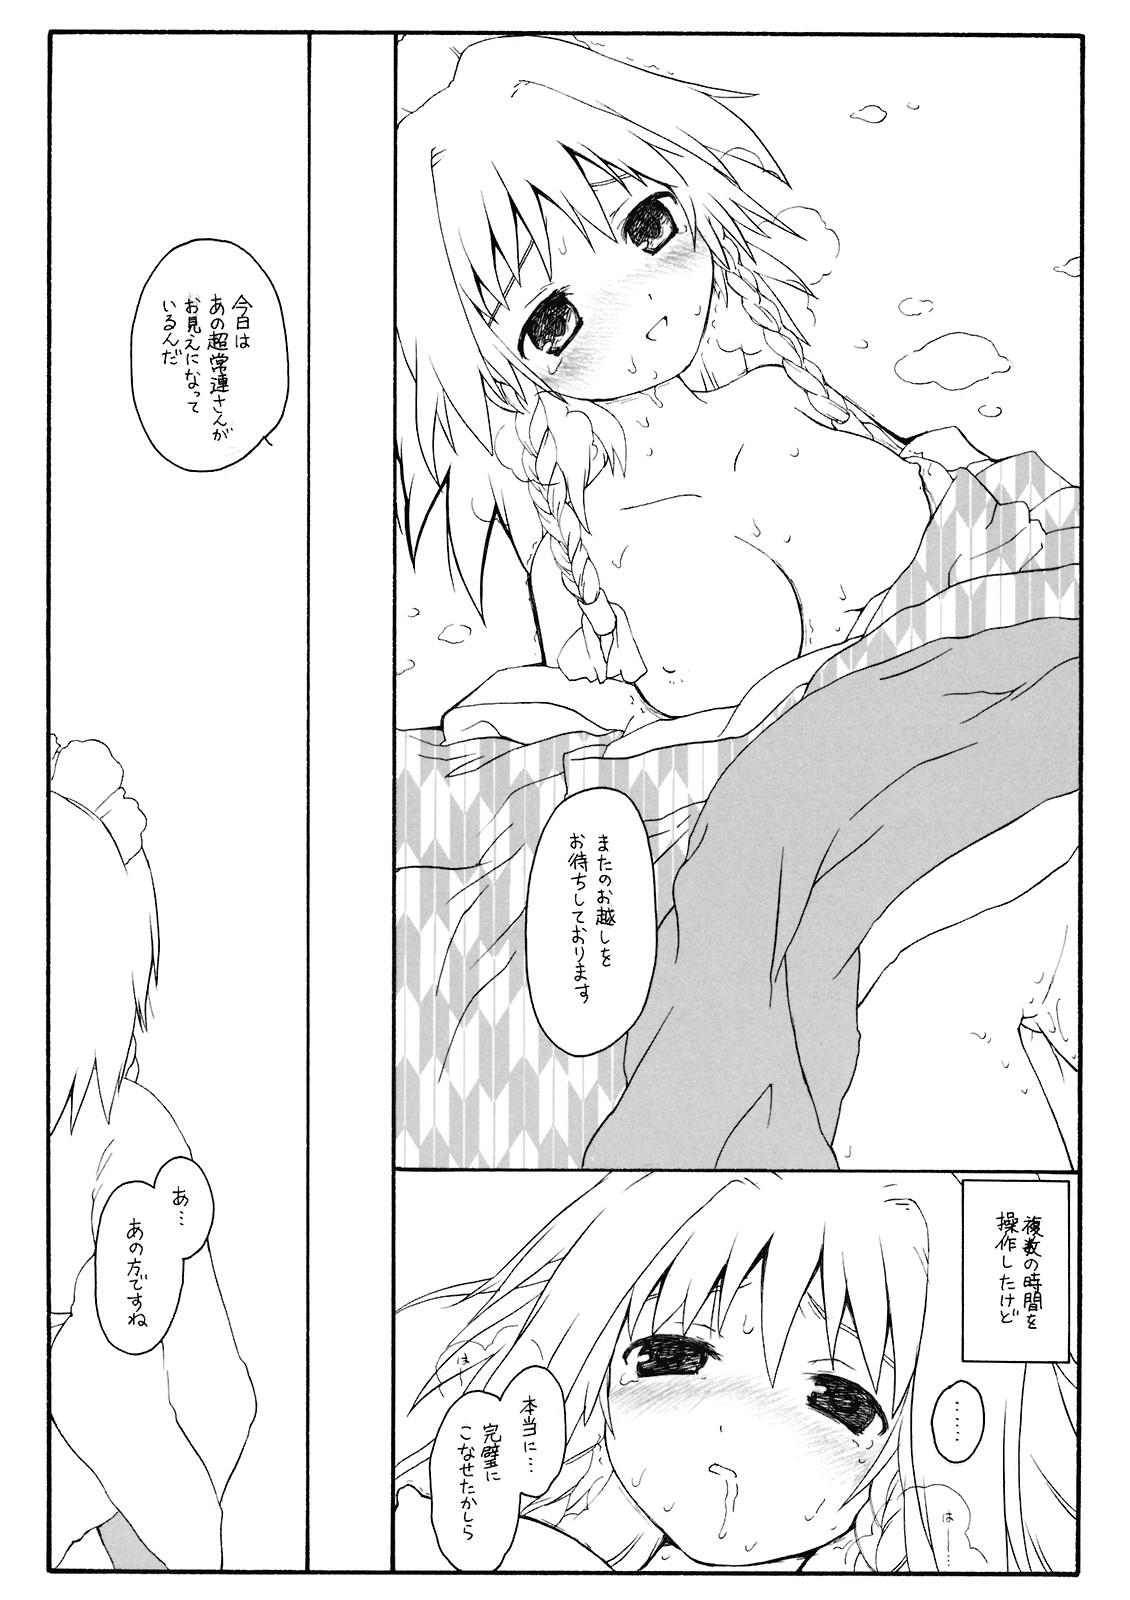 Fake Aru Omise no Ichinichi Sono 4 - Touhou project Pussy Play - Page 10